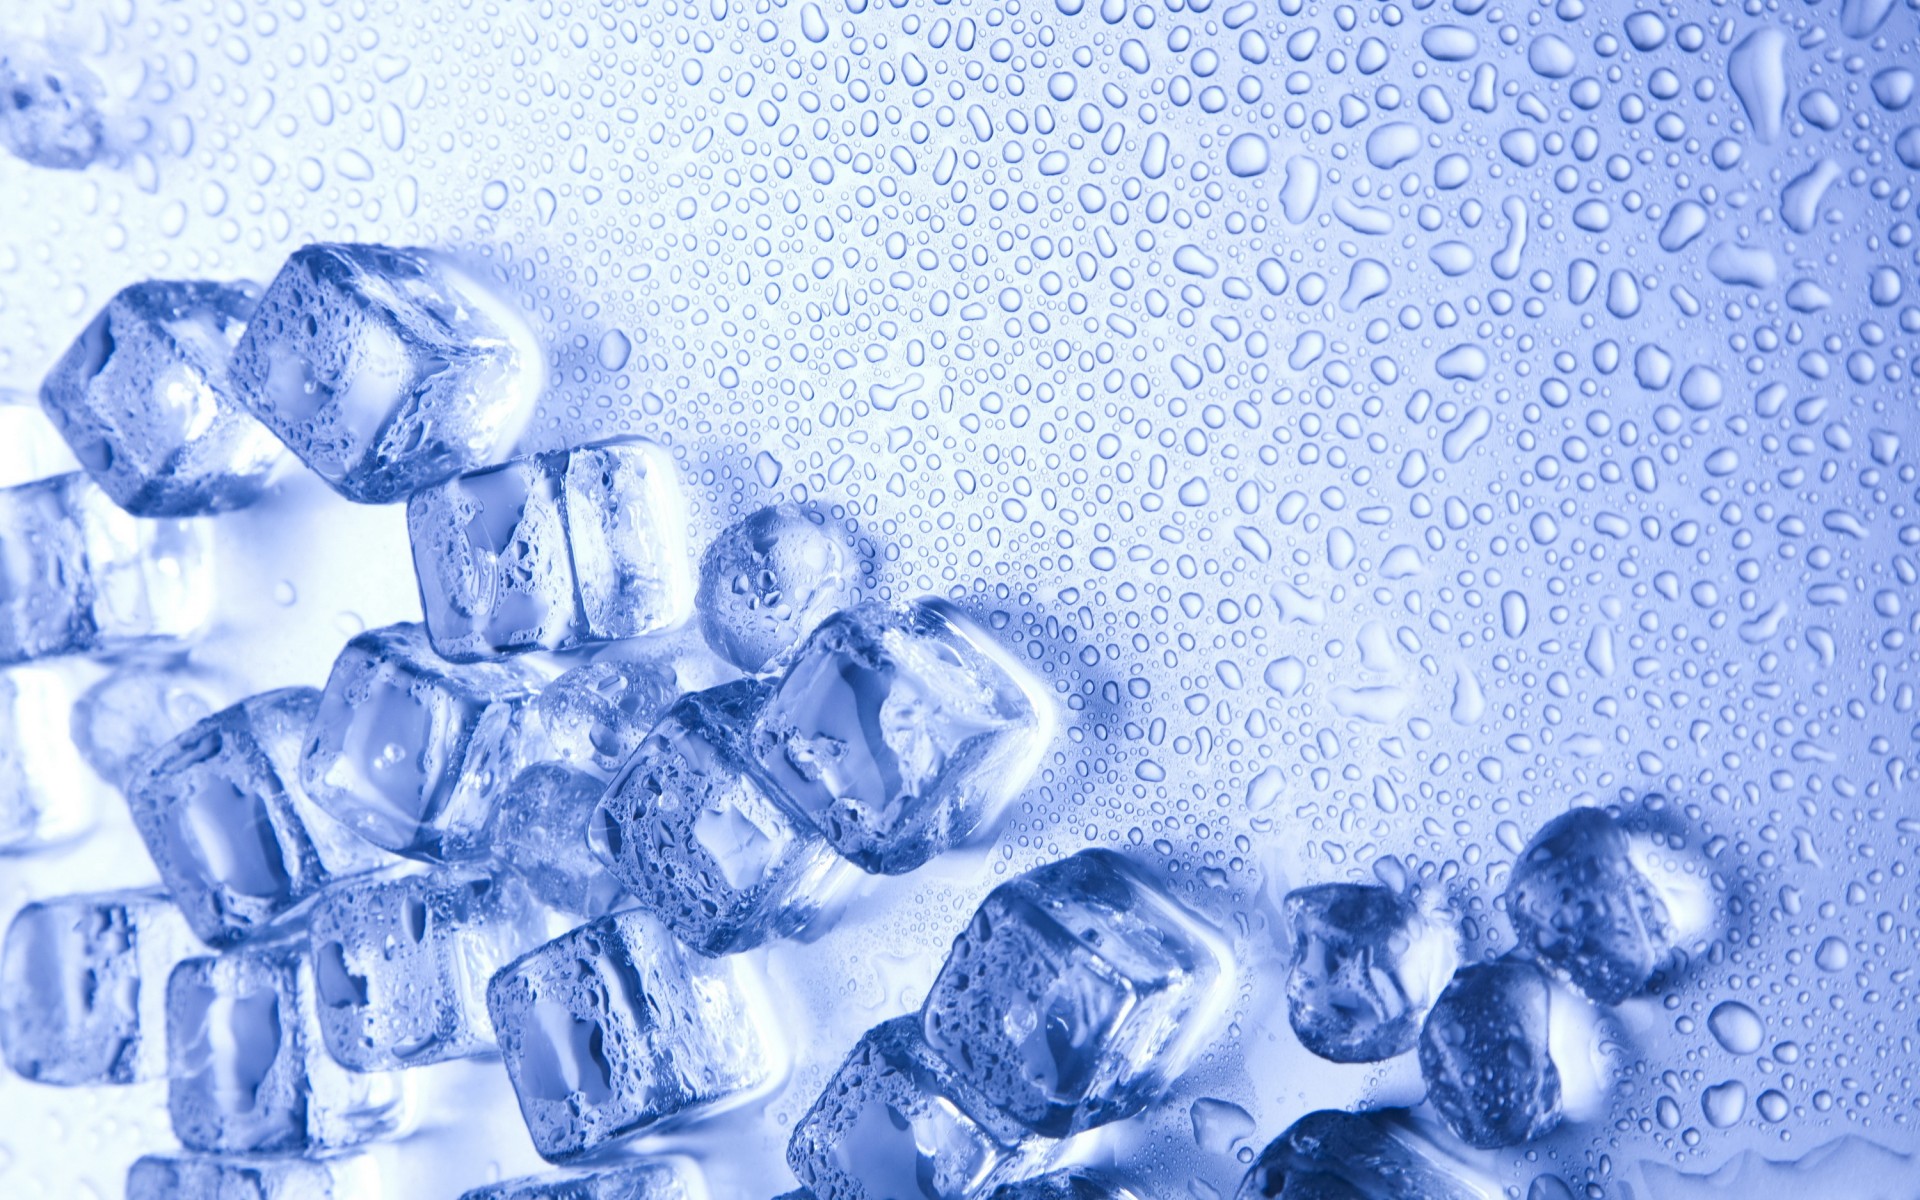 drops ice cubes close-up cold wallpaper background